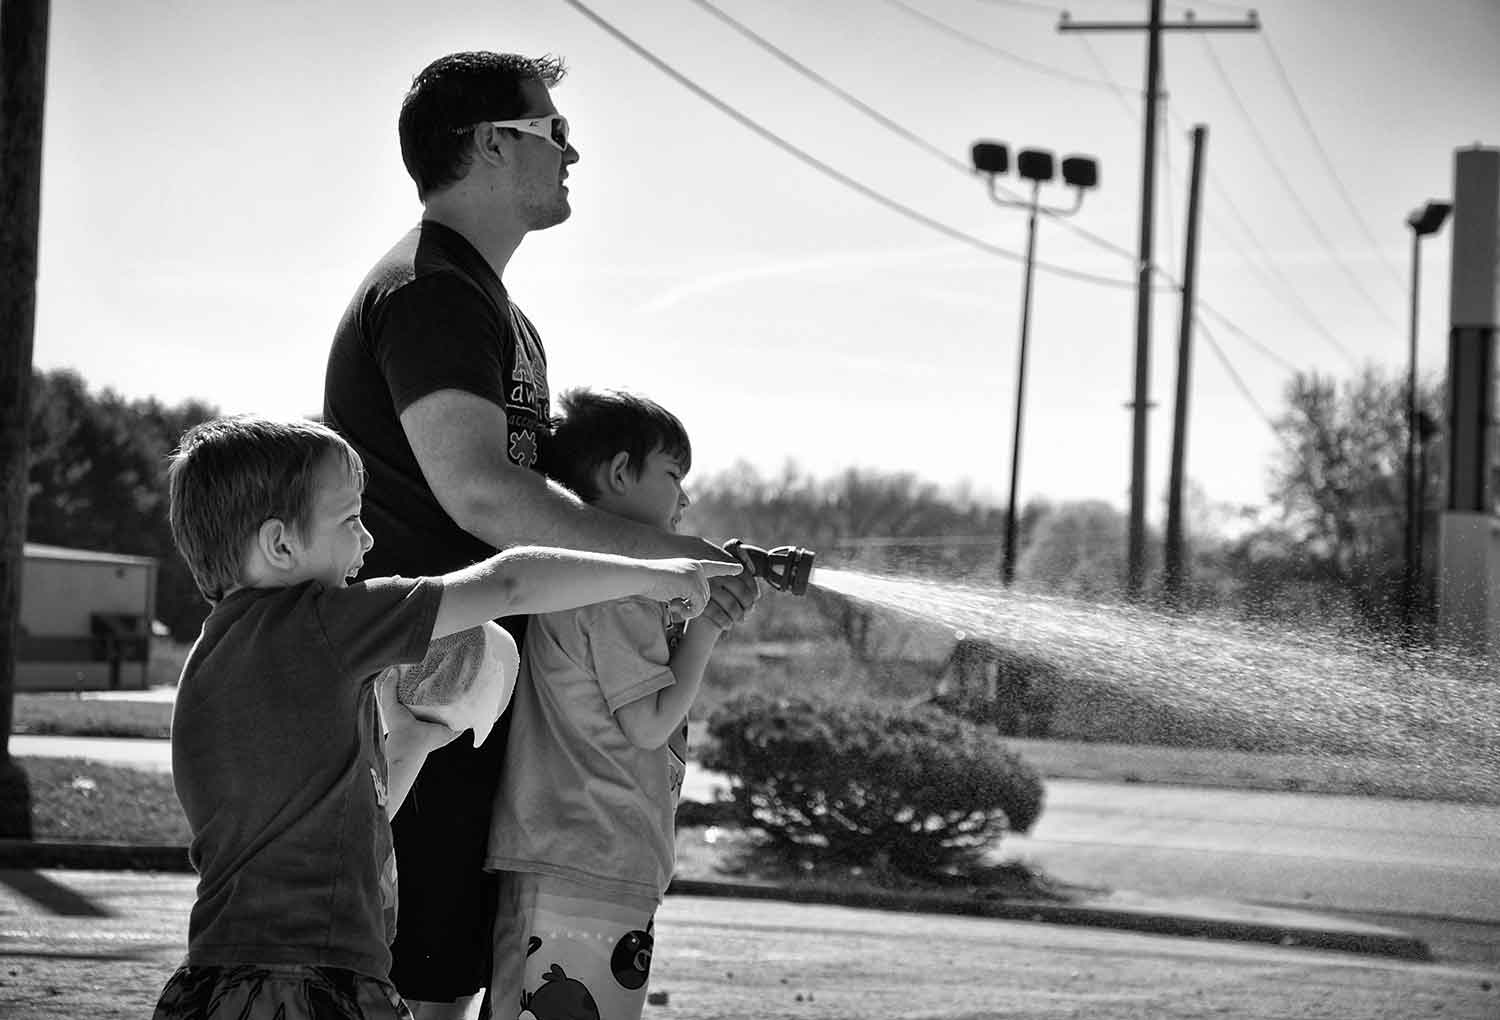 Landon and Noah Francis help their dad Jesse rinse off a car during an Autism Awareness event. photo by Molly Morgan - 2013